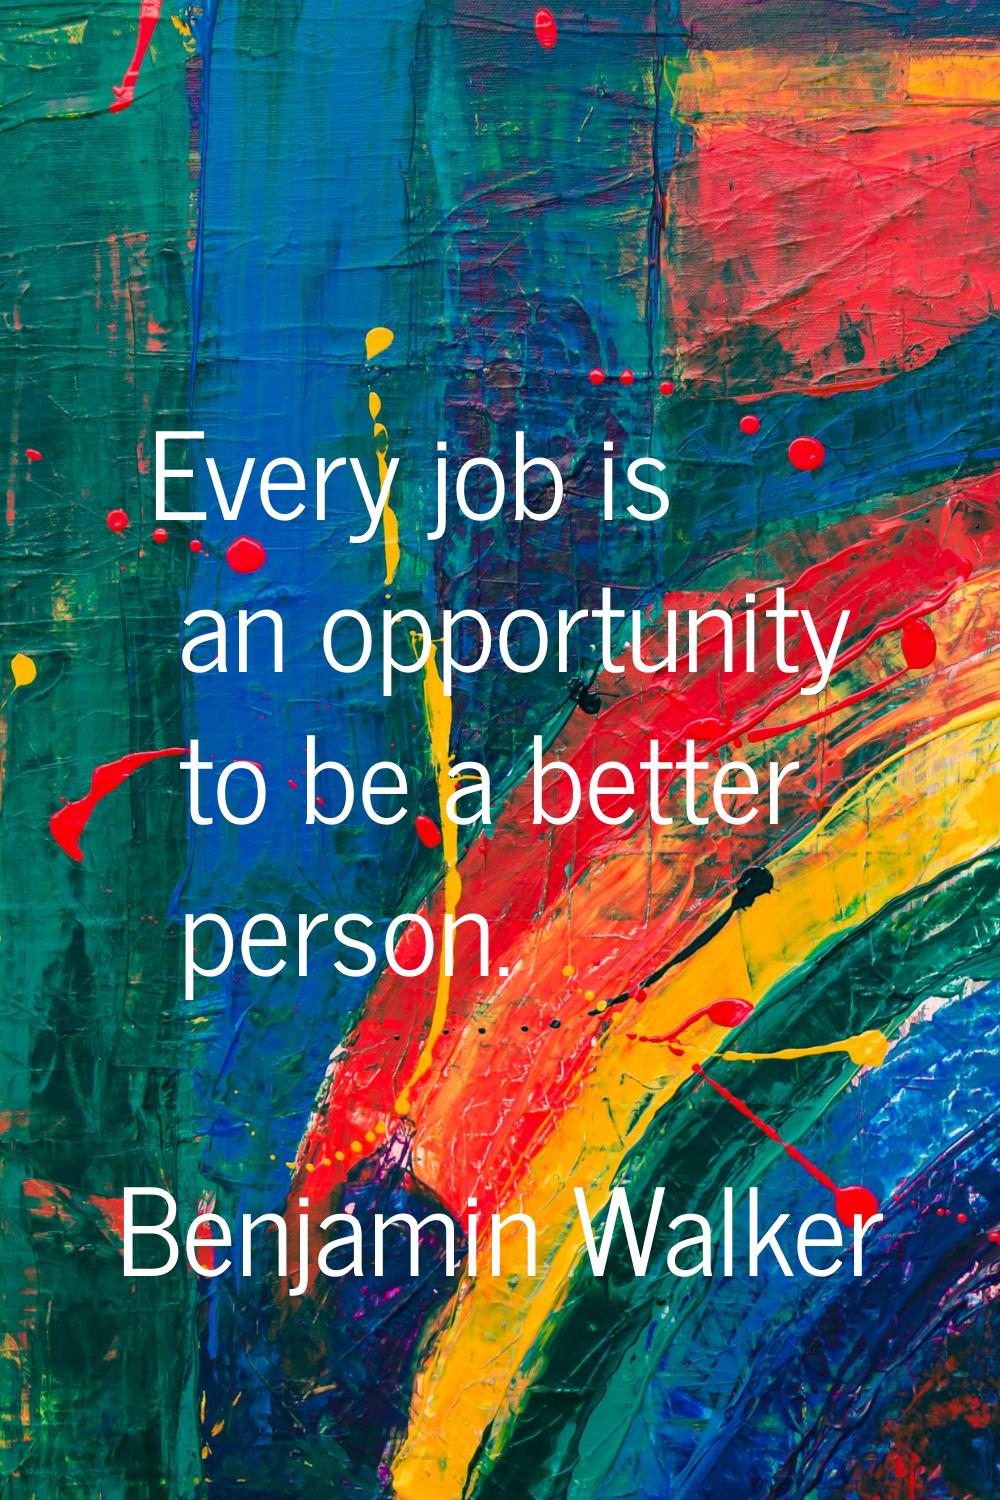 Every job is an opportunity to be a better person.